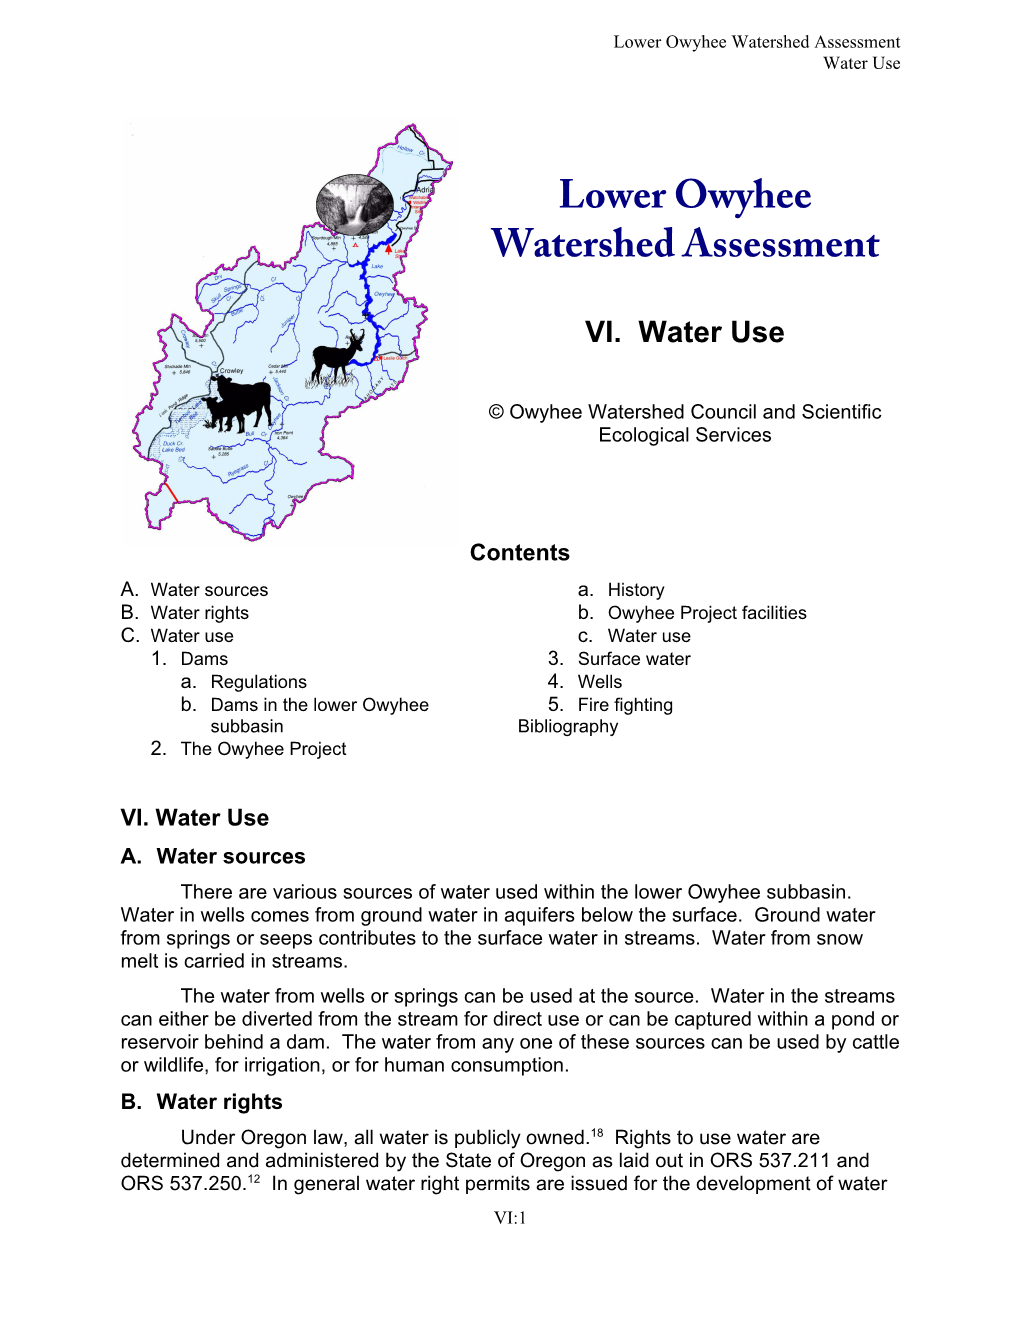 Watershed Assessment Water Use